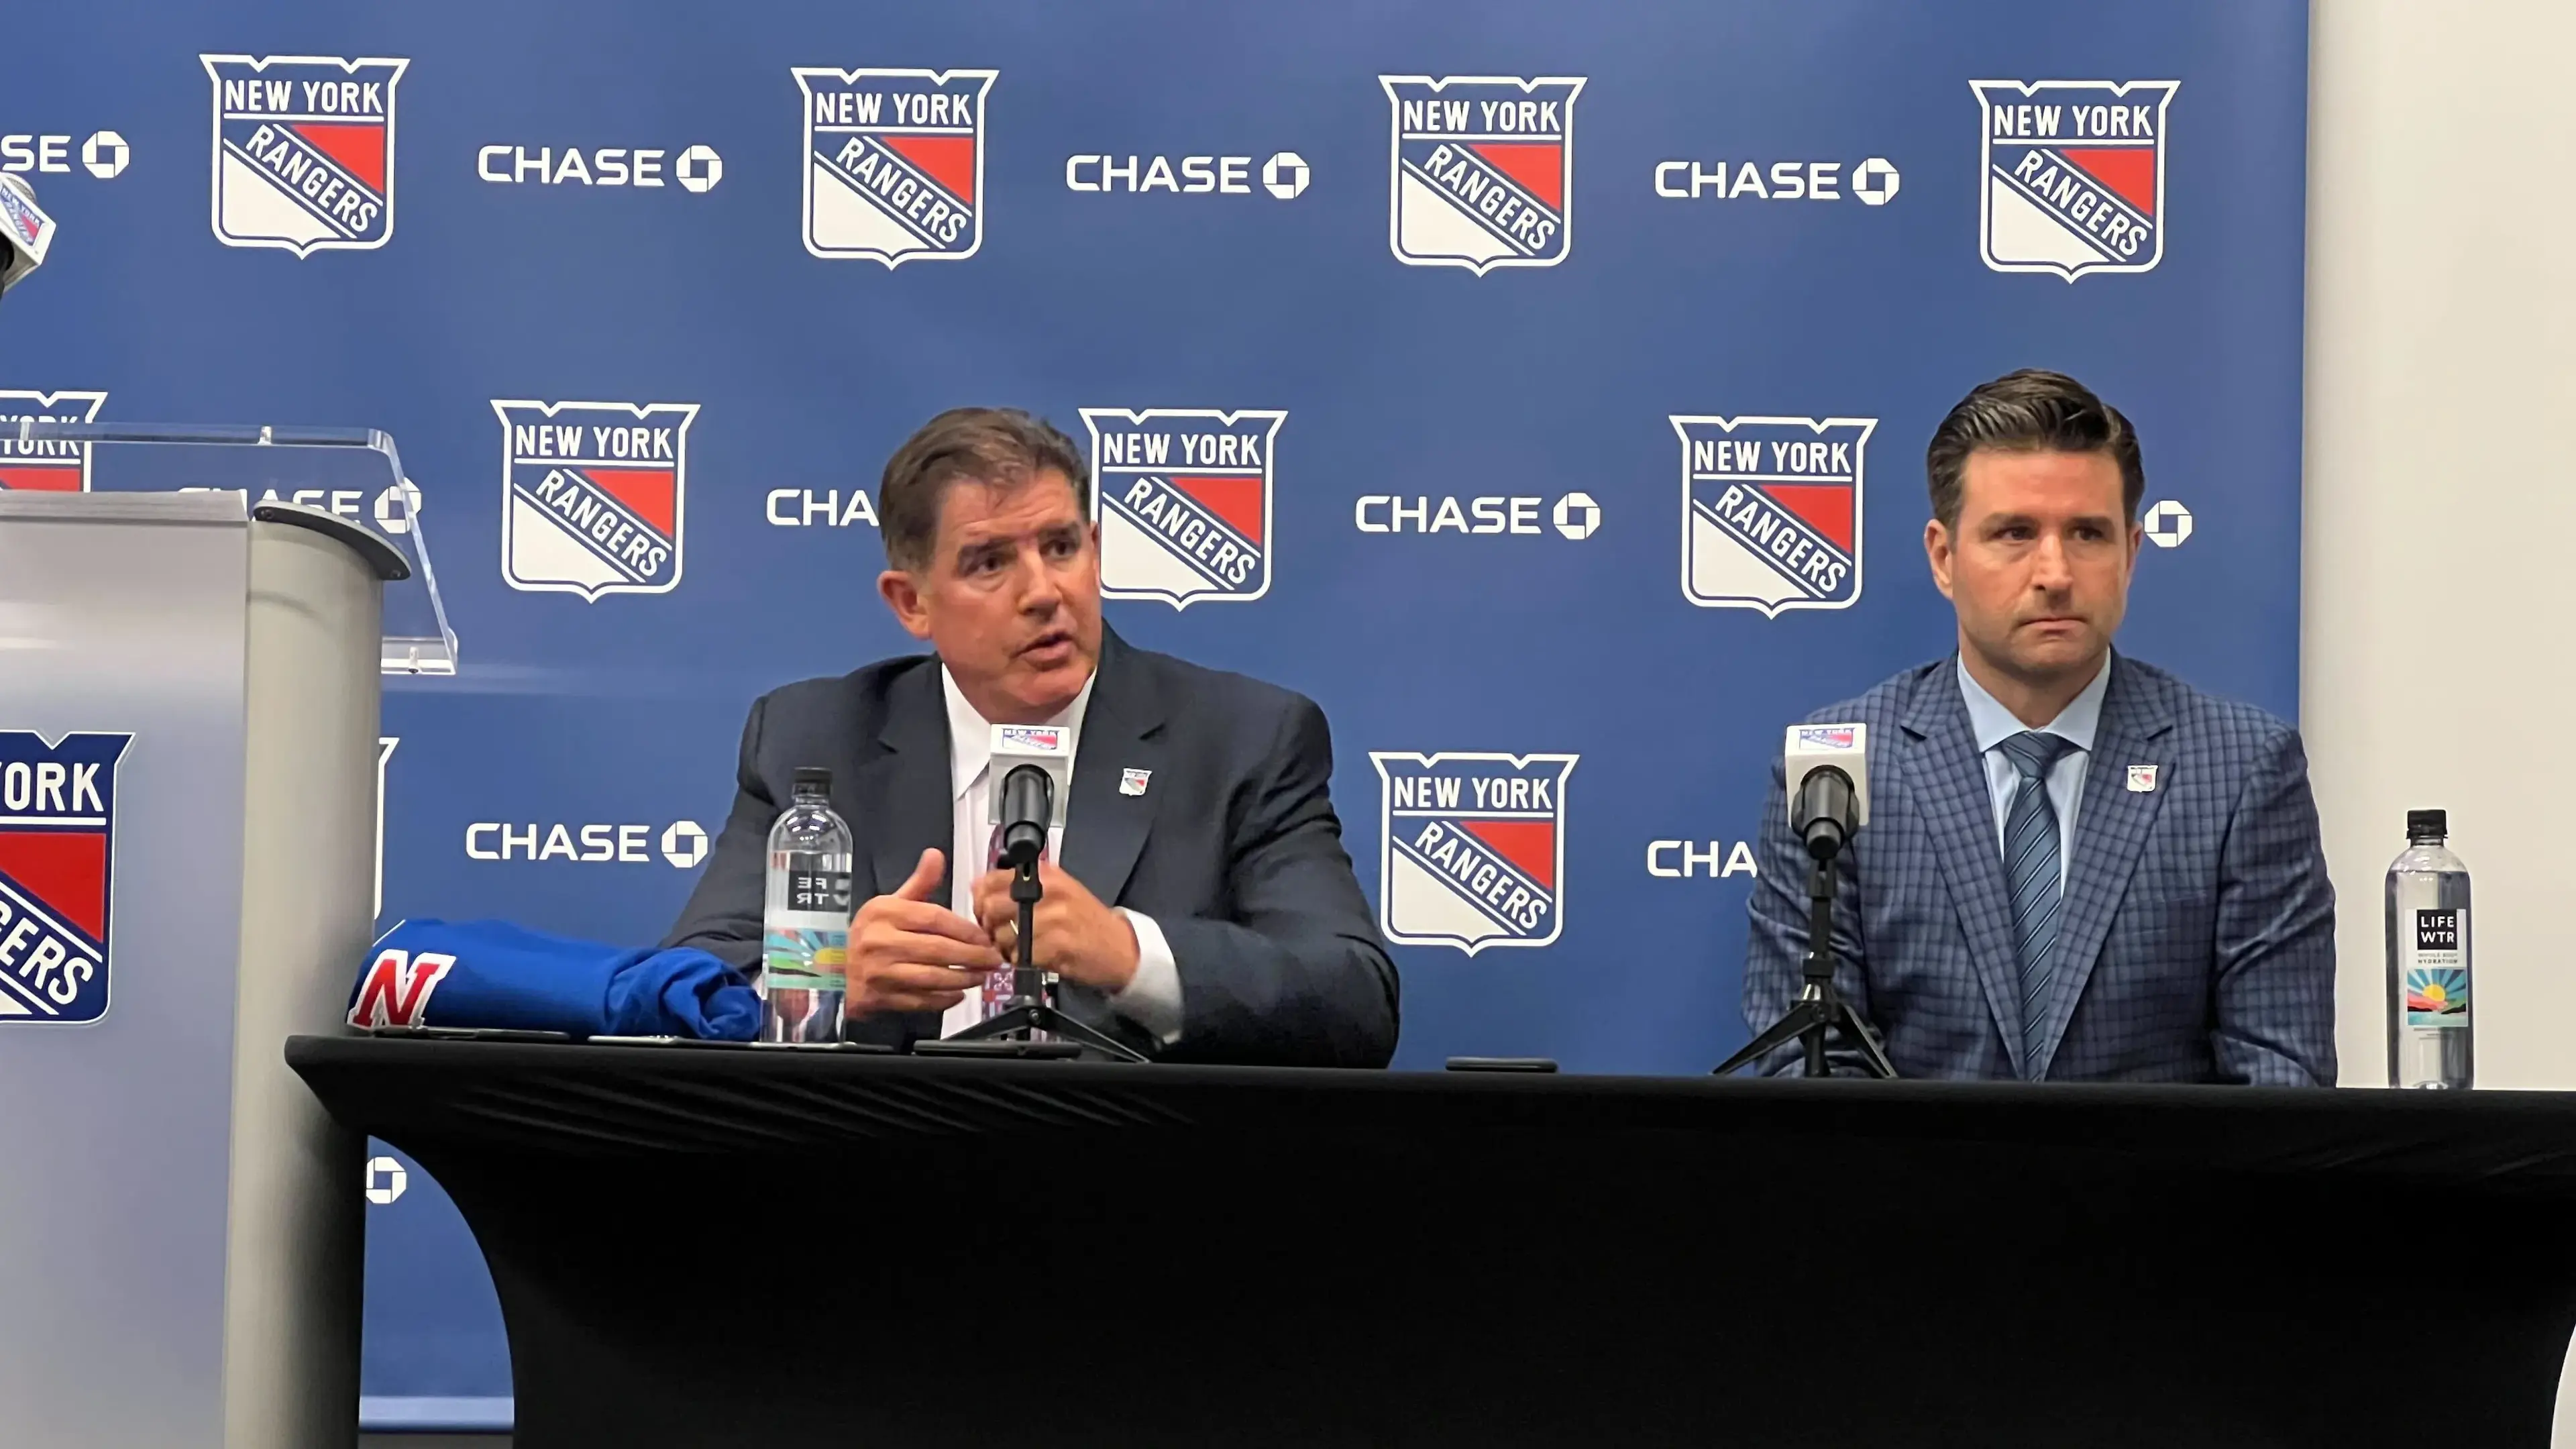 Peter Laviolette speaks to the media alongside Chris Drury at his introductory press conference as the head coach of the New York Rangers. / Conor Byrne - SNY